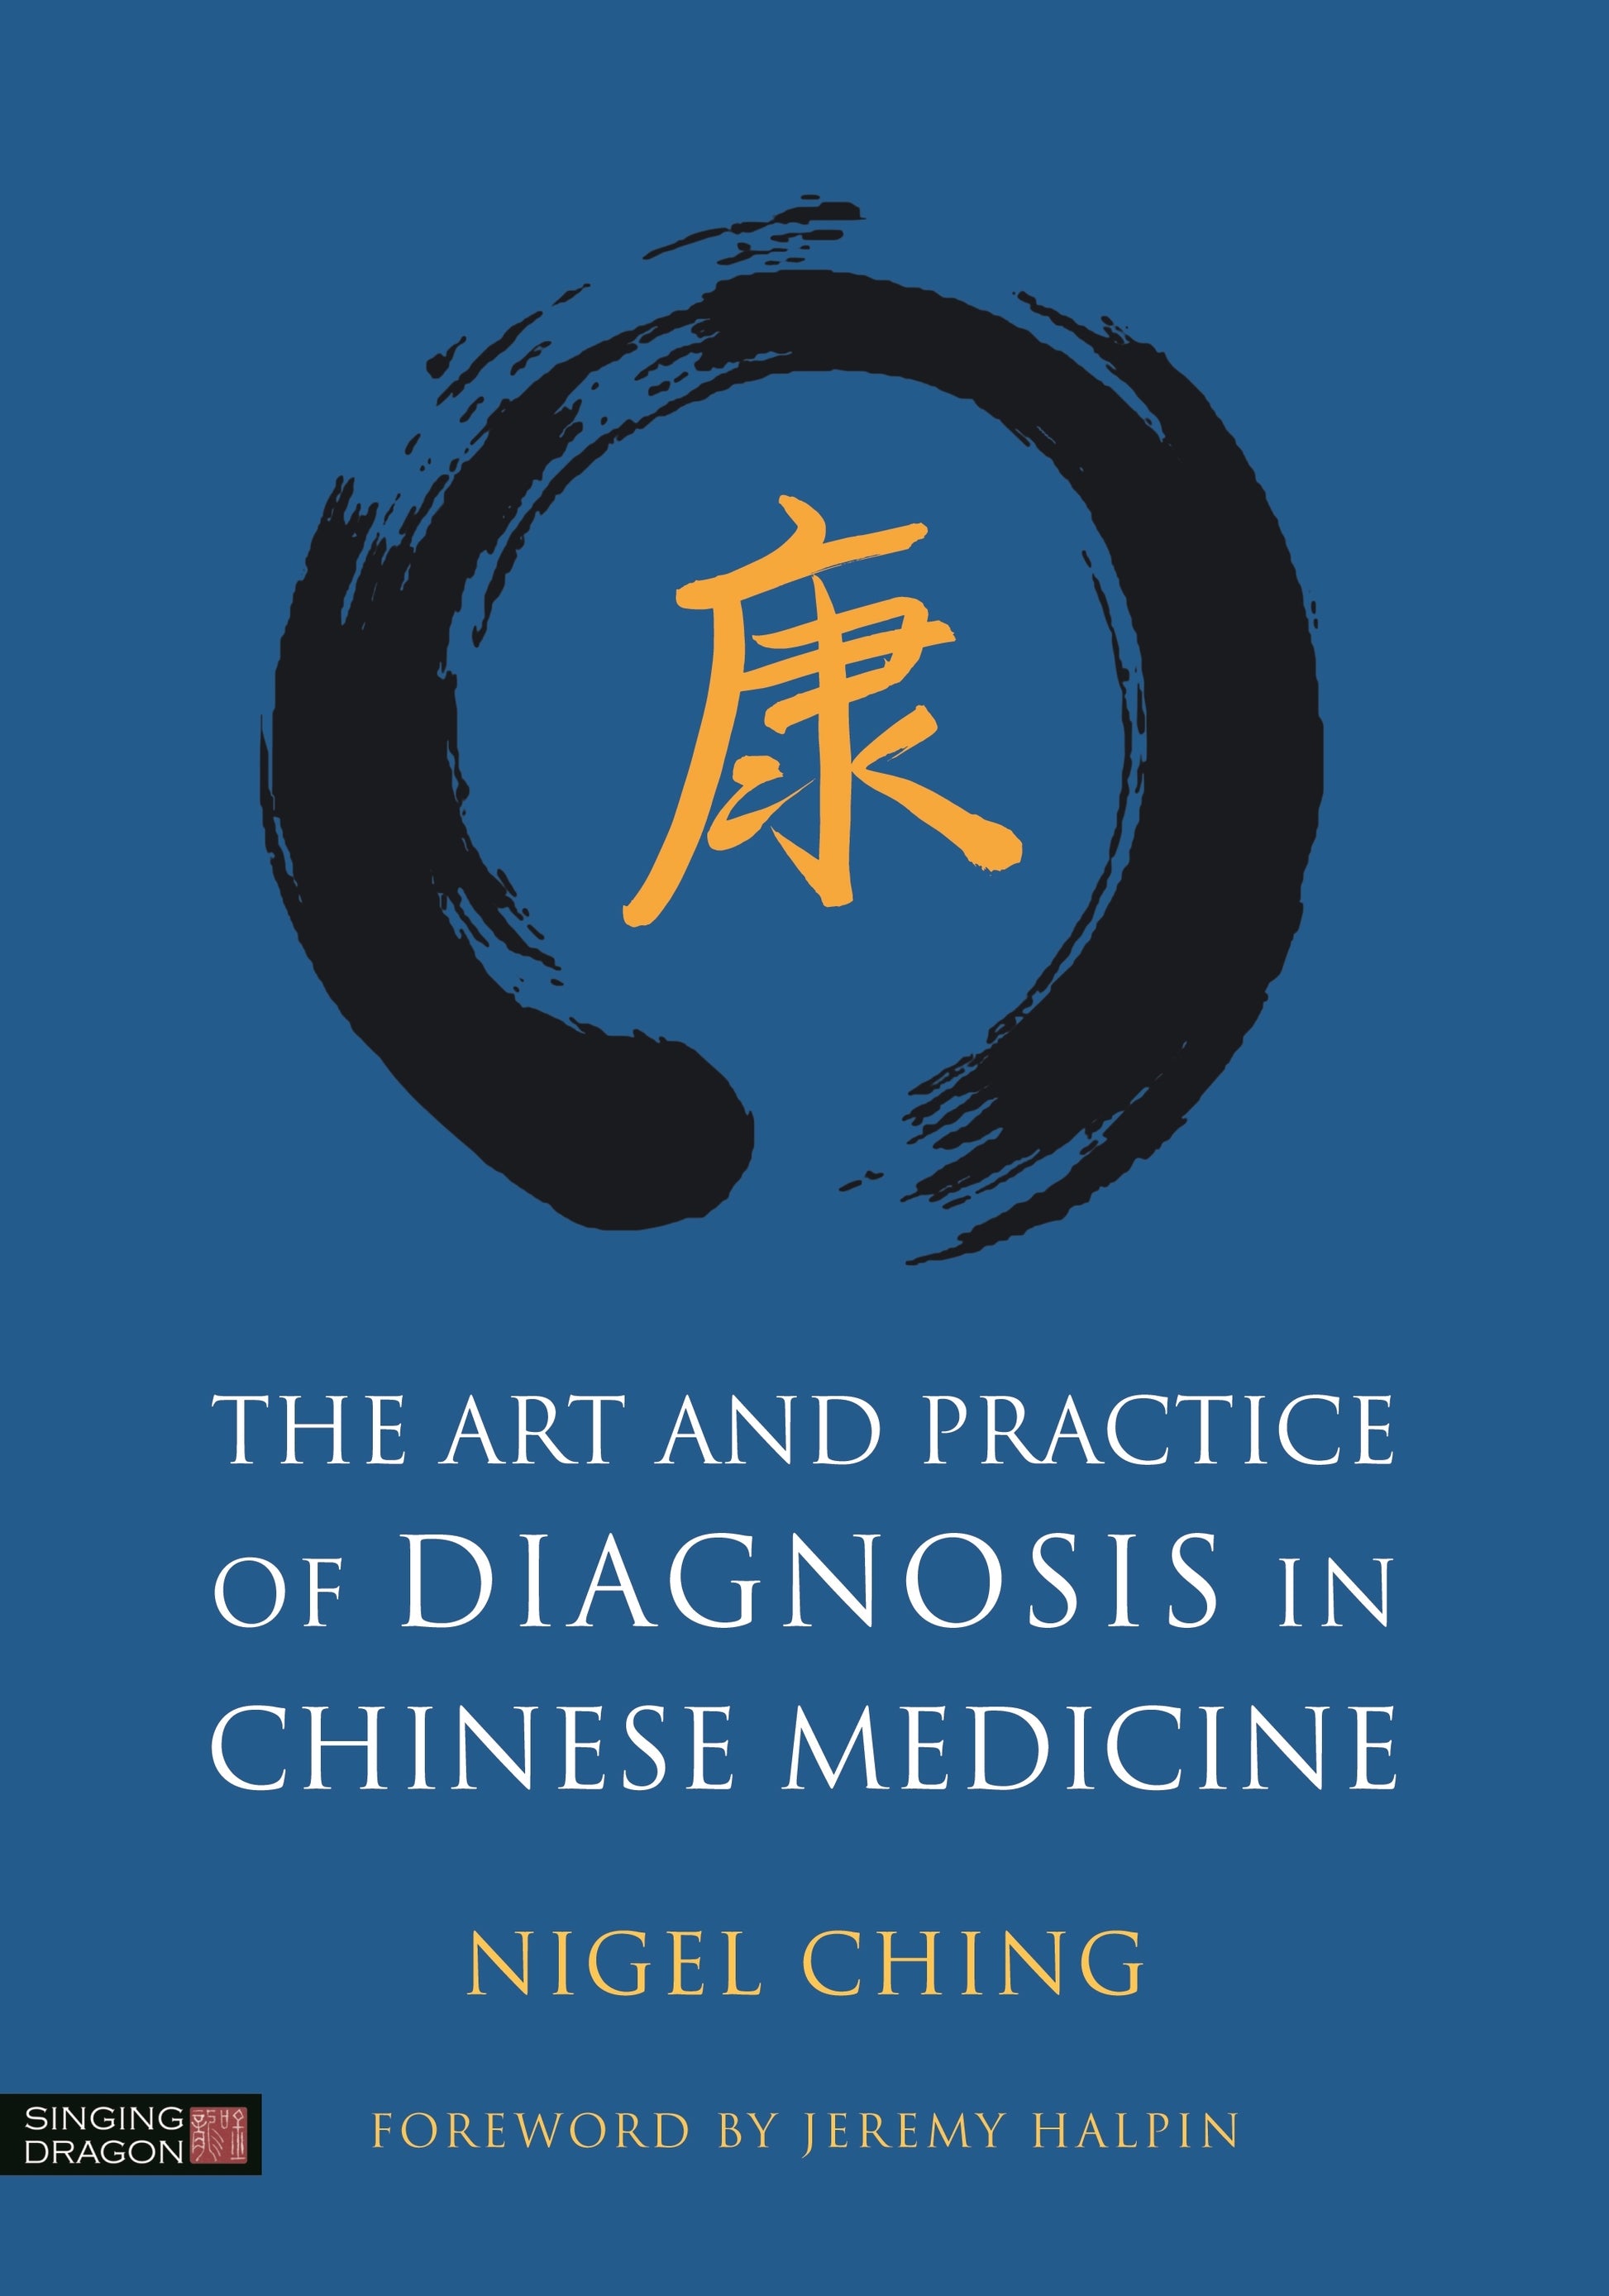 The Art and Practice of Diagnosis in Chinese Medicine by Nigel Ching, Jeremy Halpin